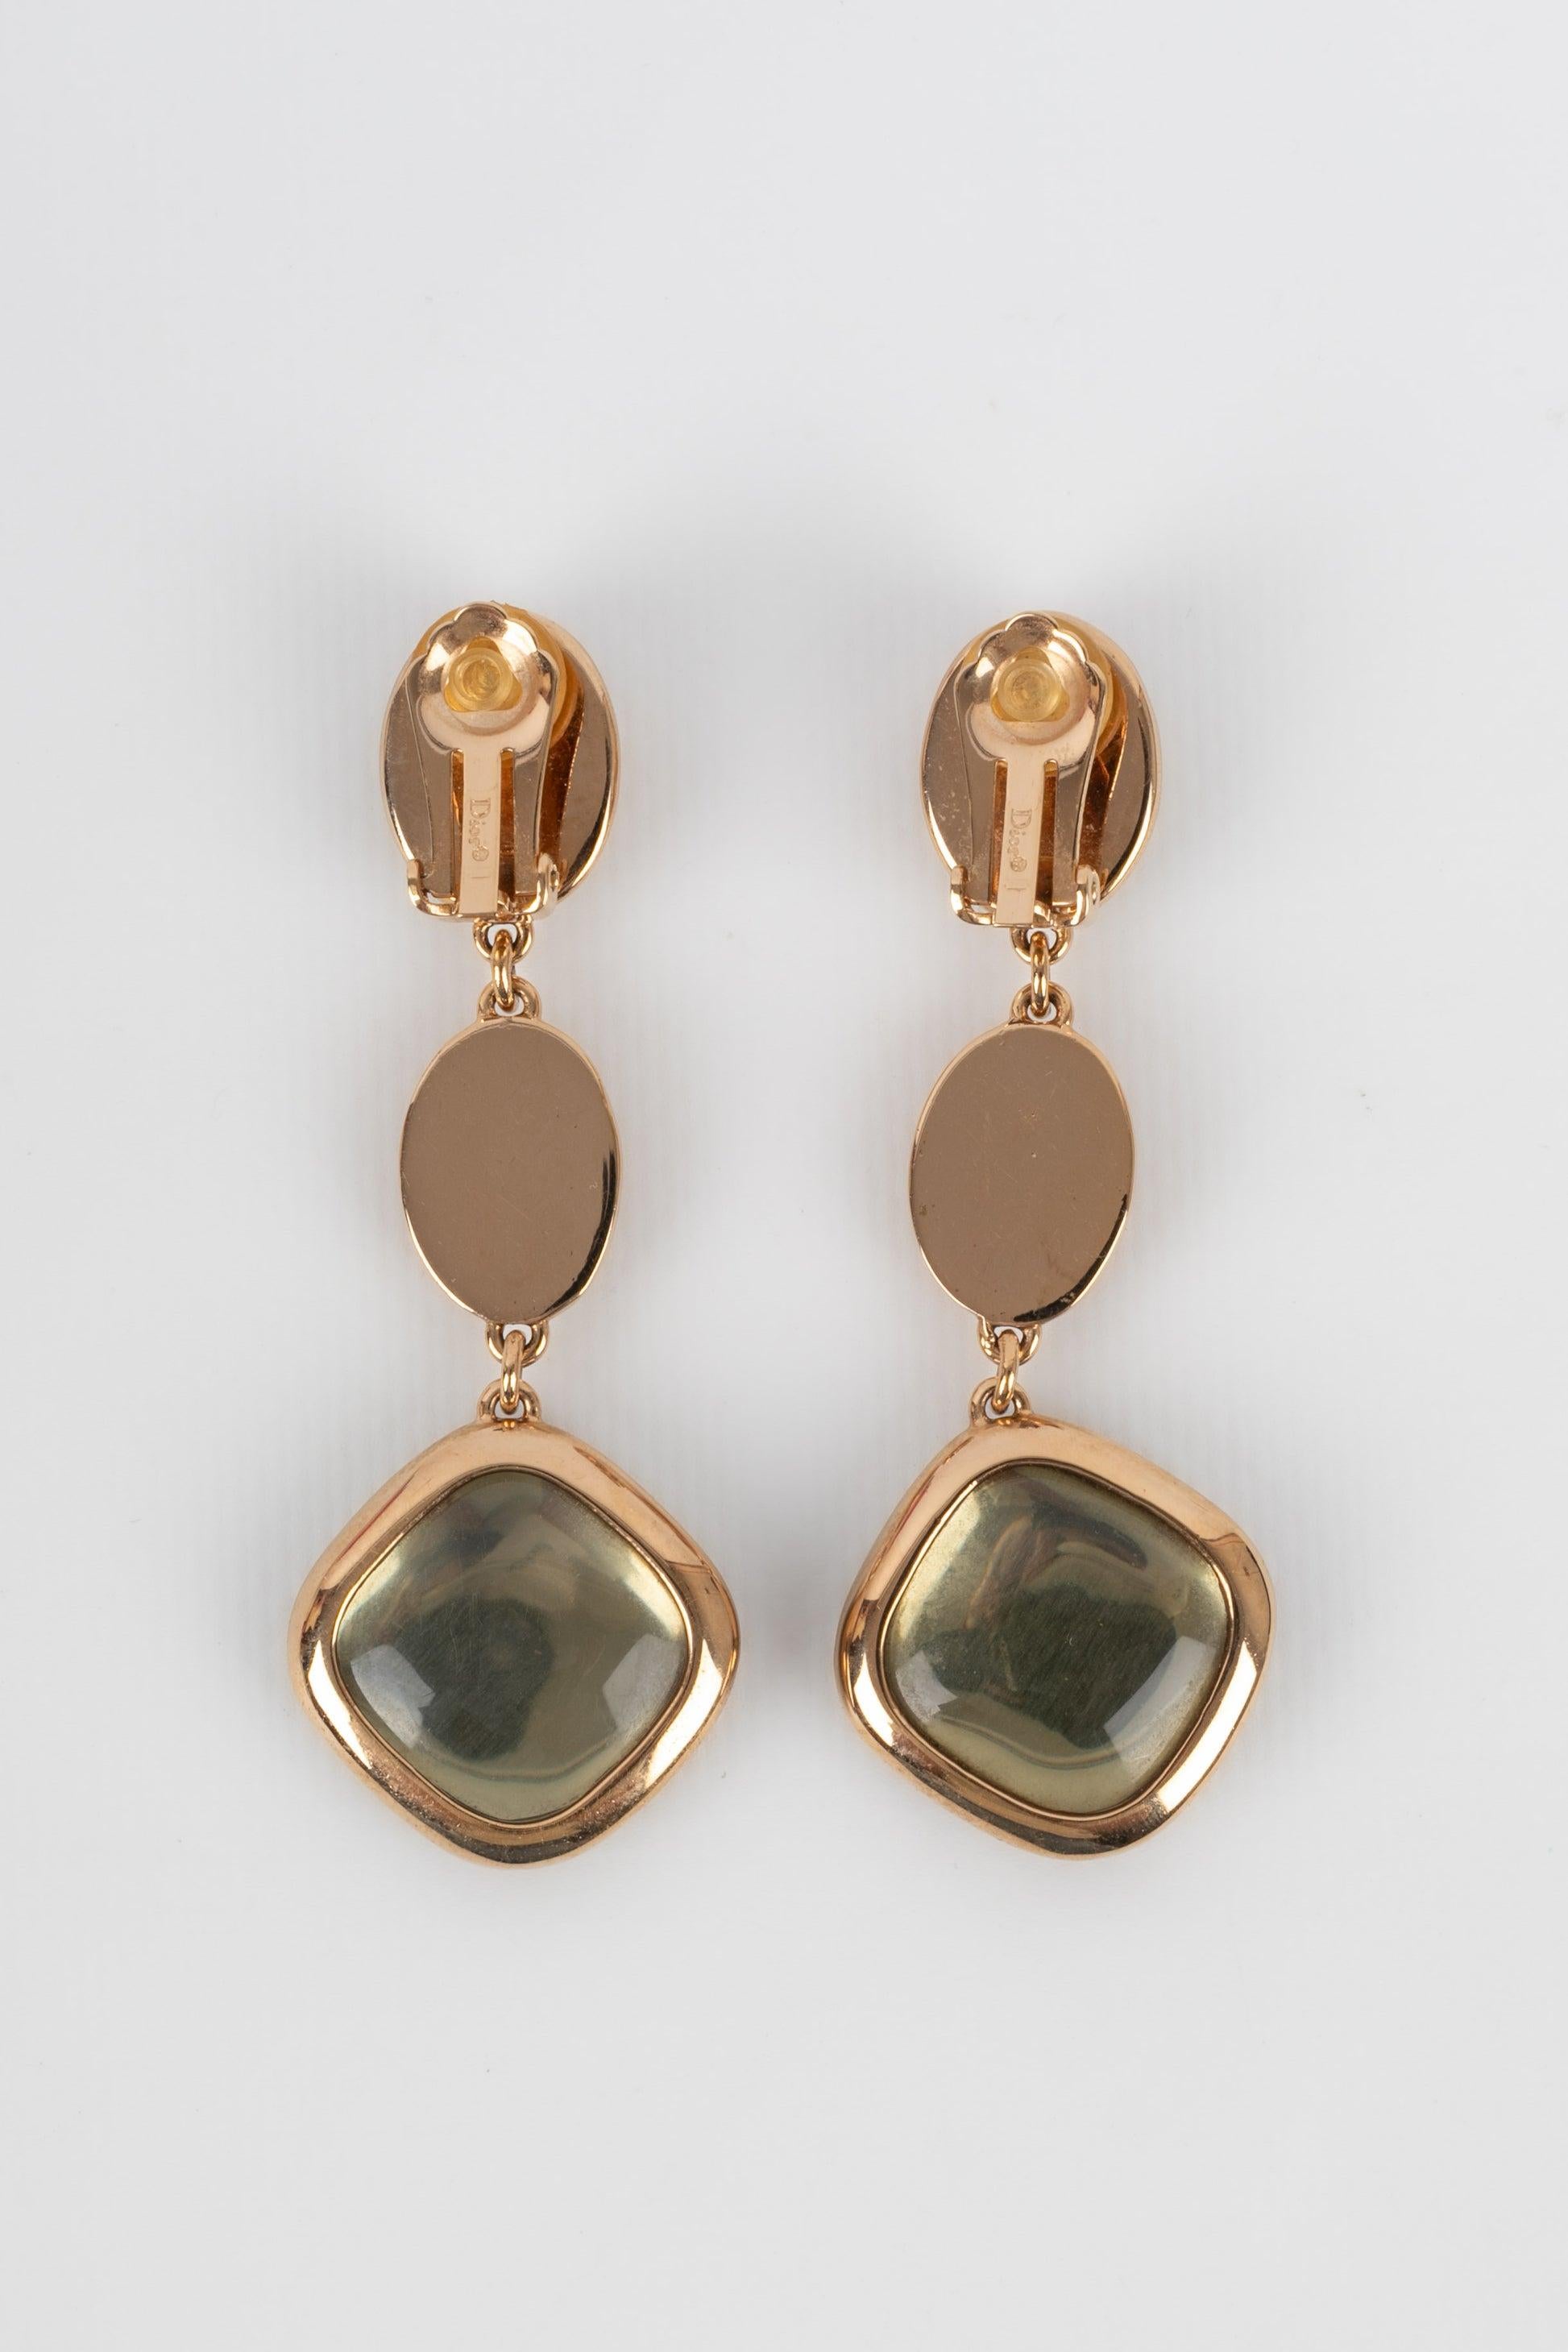 Dior - Golden metal clip-on earrings with resin and glass cabochons.

Additional information:
Condition: Very good condition
Dimensions: Length: 8 cm

Seller Reference: BO183